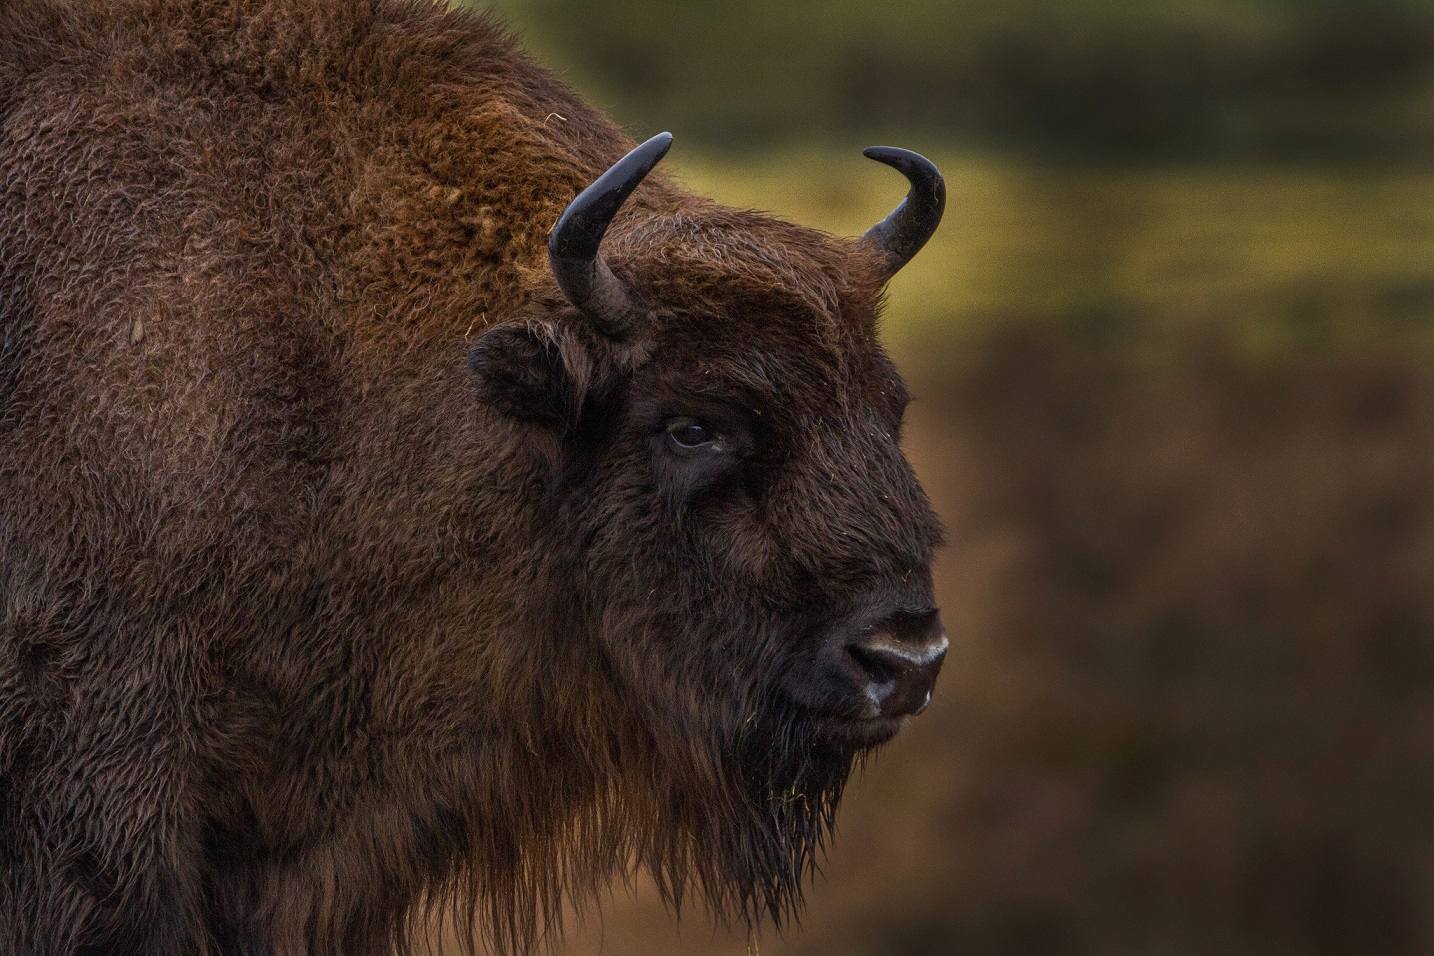 Bison looking to the right IMAGE: Laura Moore 2020